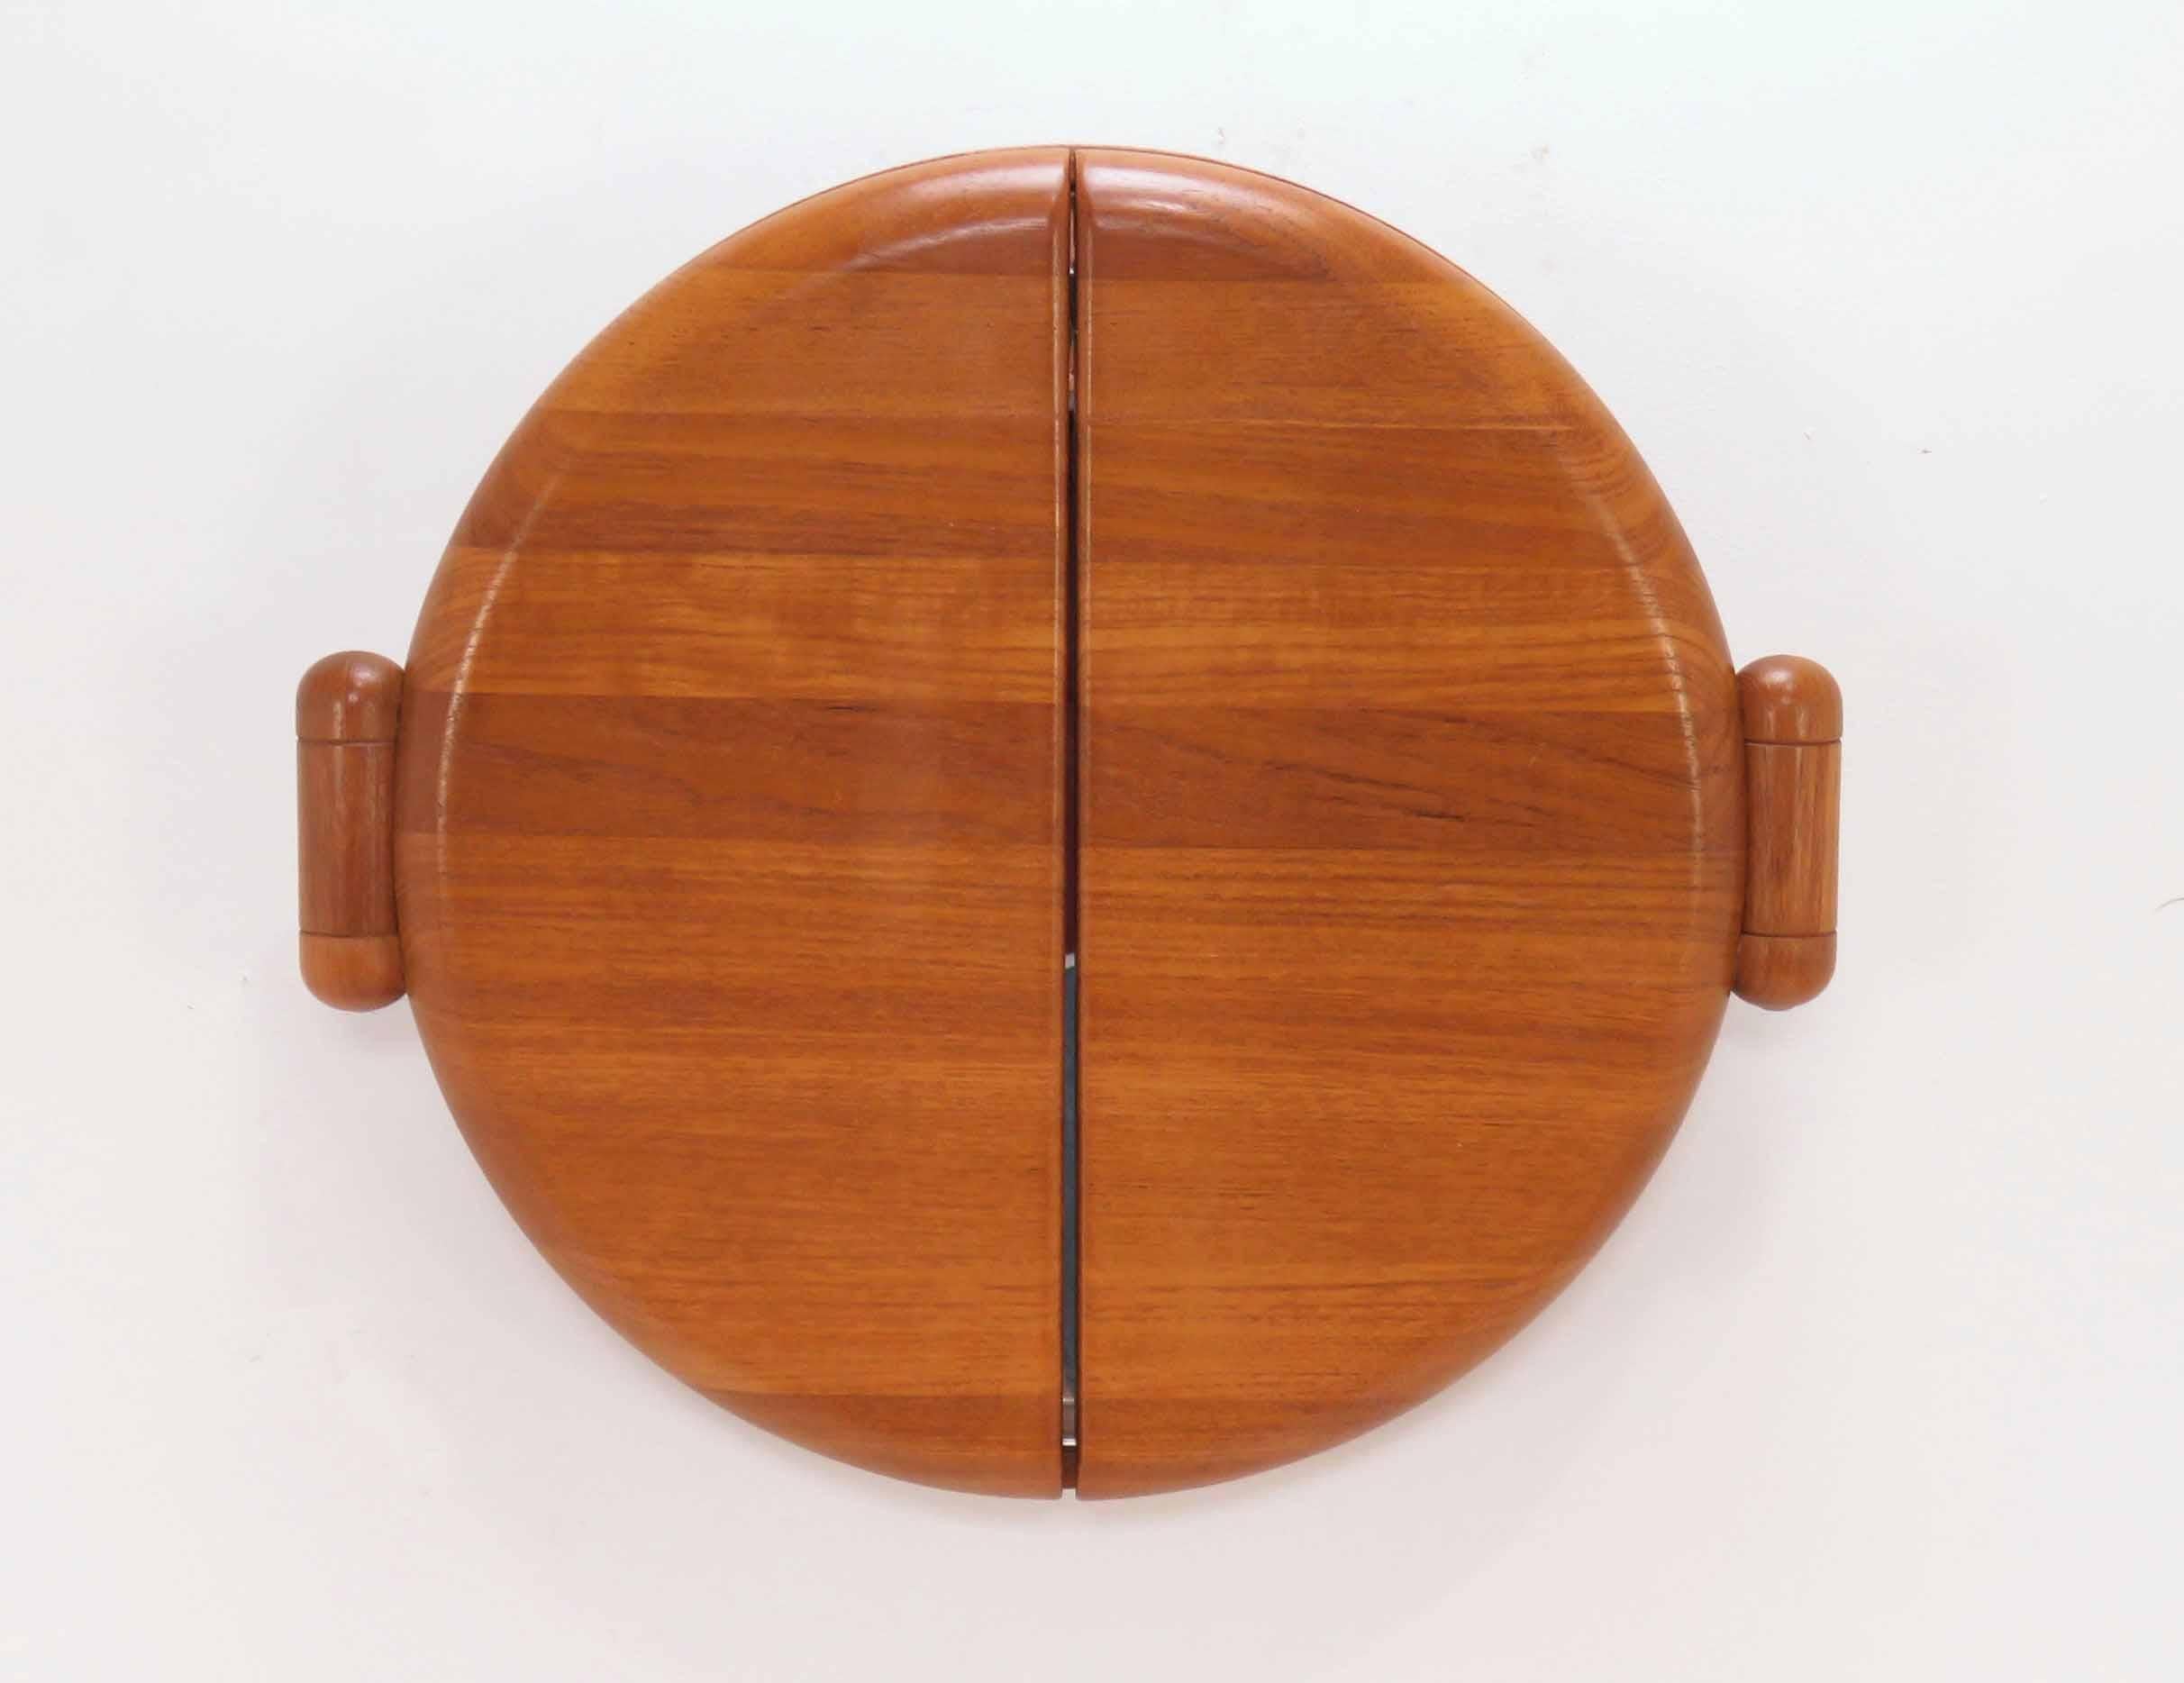 Danish teak adjustable tri-fold wall mirror with hinged side panels. When closed, this makes an interesting wall sculpture, circa 1970s. In the style of Pedersen & Hansen, Denmark.

Center mirror is 19.5